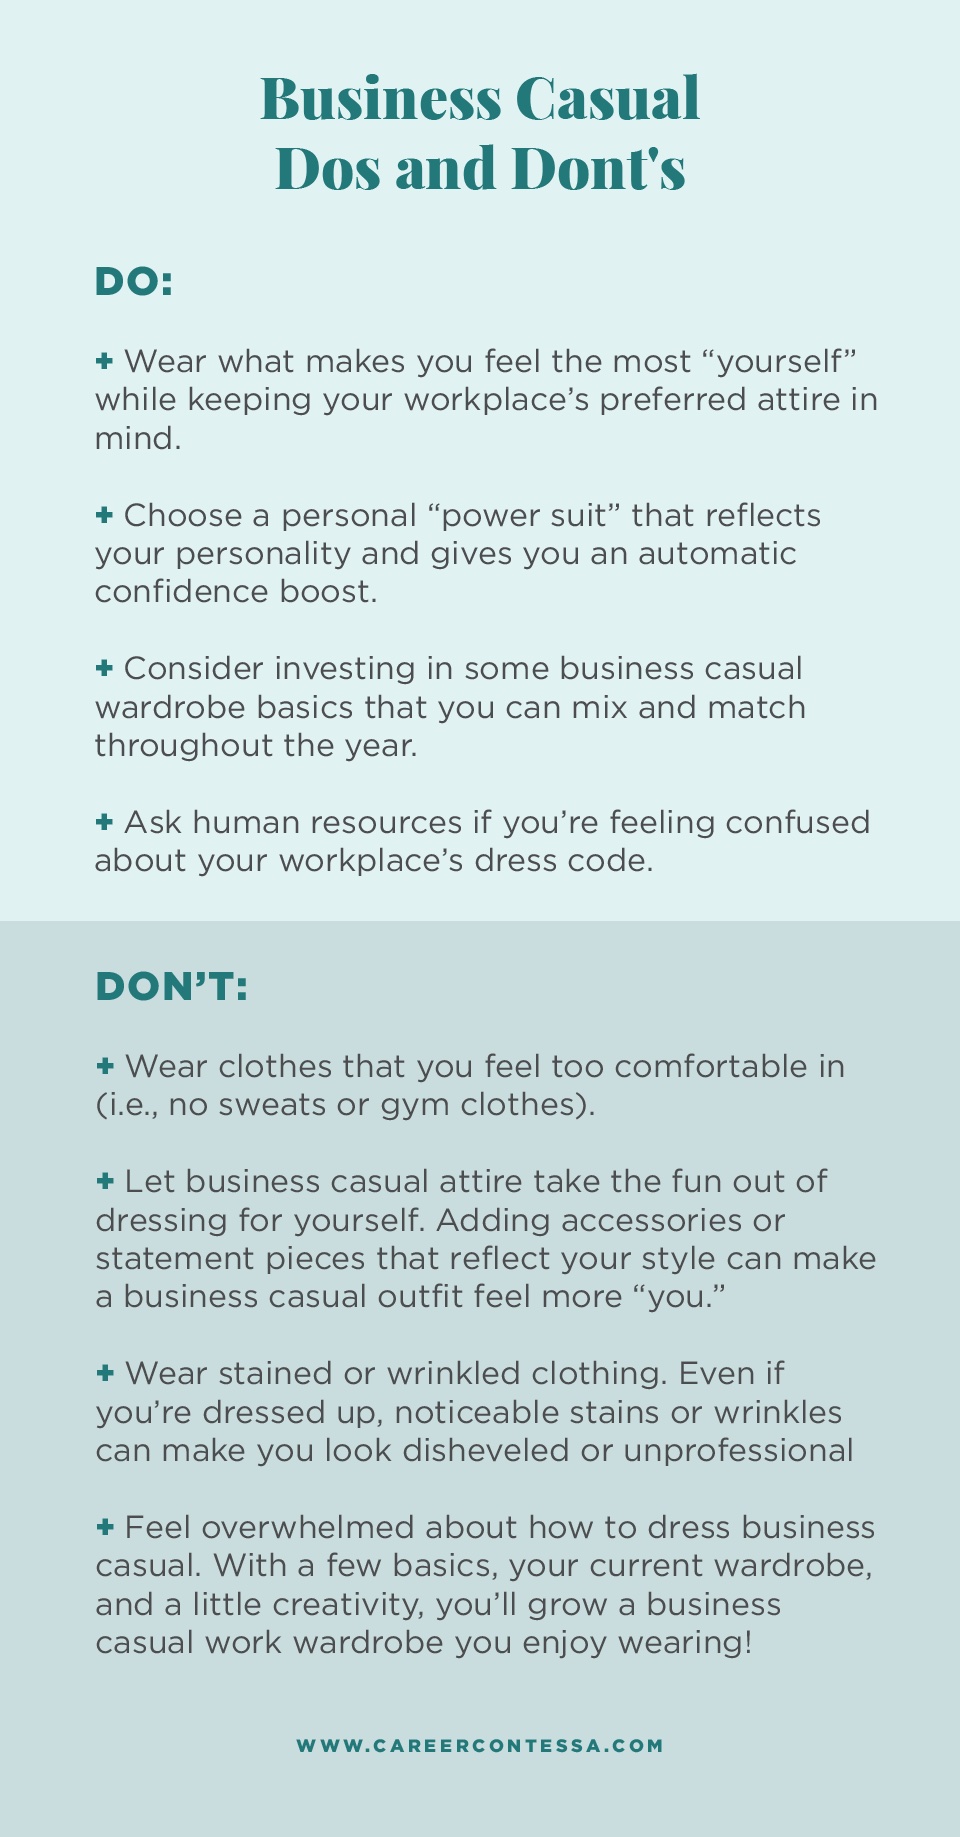 How to Dress Business Casual as a Women